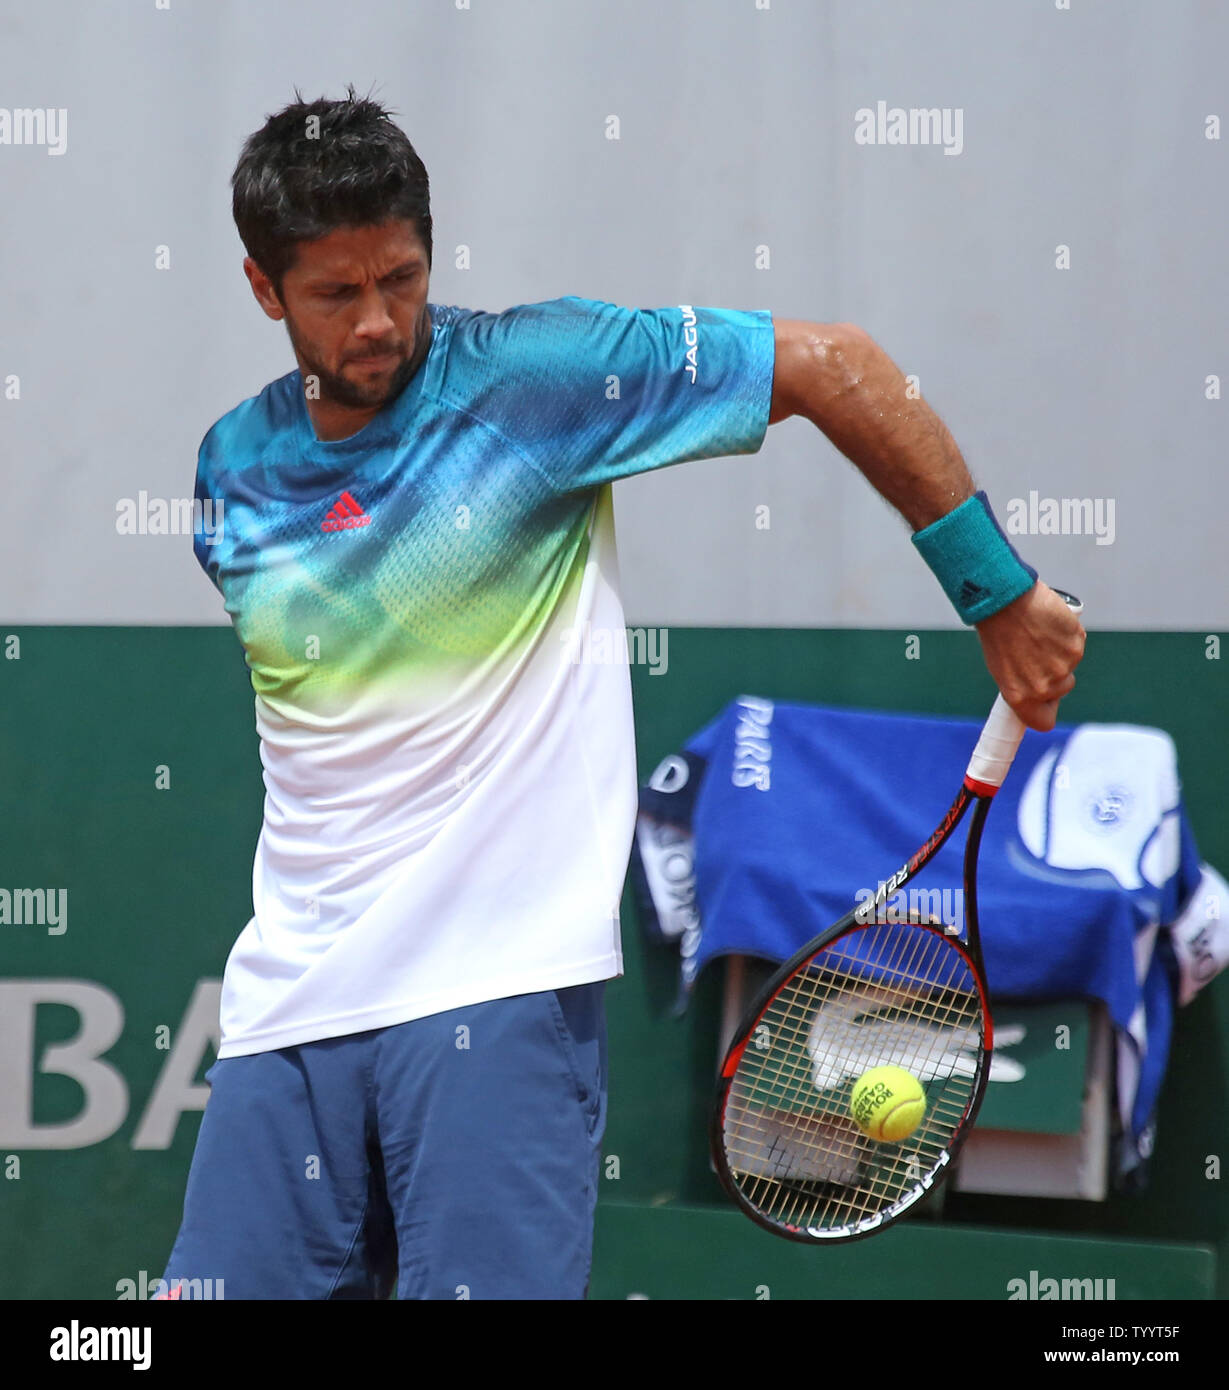 Fernando Verdasco of Spain hits a behind the back shot during his French  Open men's third round match against Kei Nishikori of Japan at Roland Garros  in Paris on May 27, 2016.